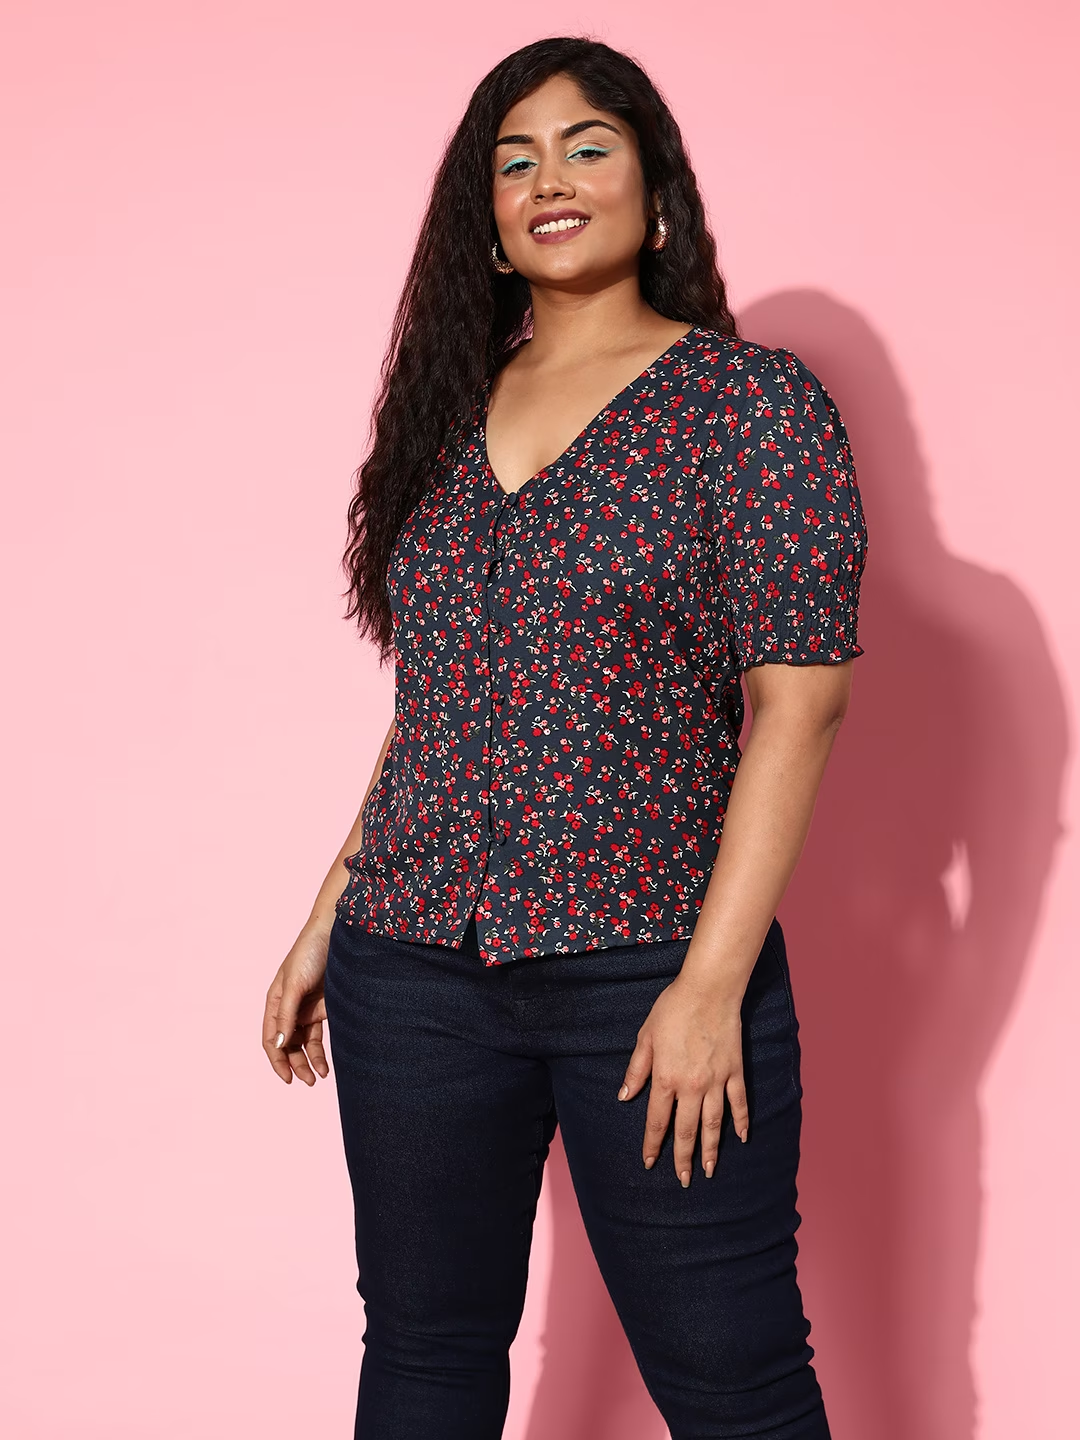 Latest Dresses for Plus Size Women - 30 Styles To Get Inspired